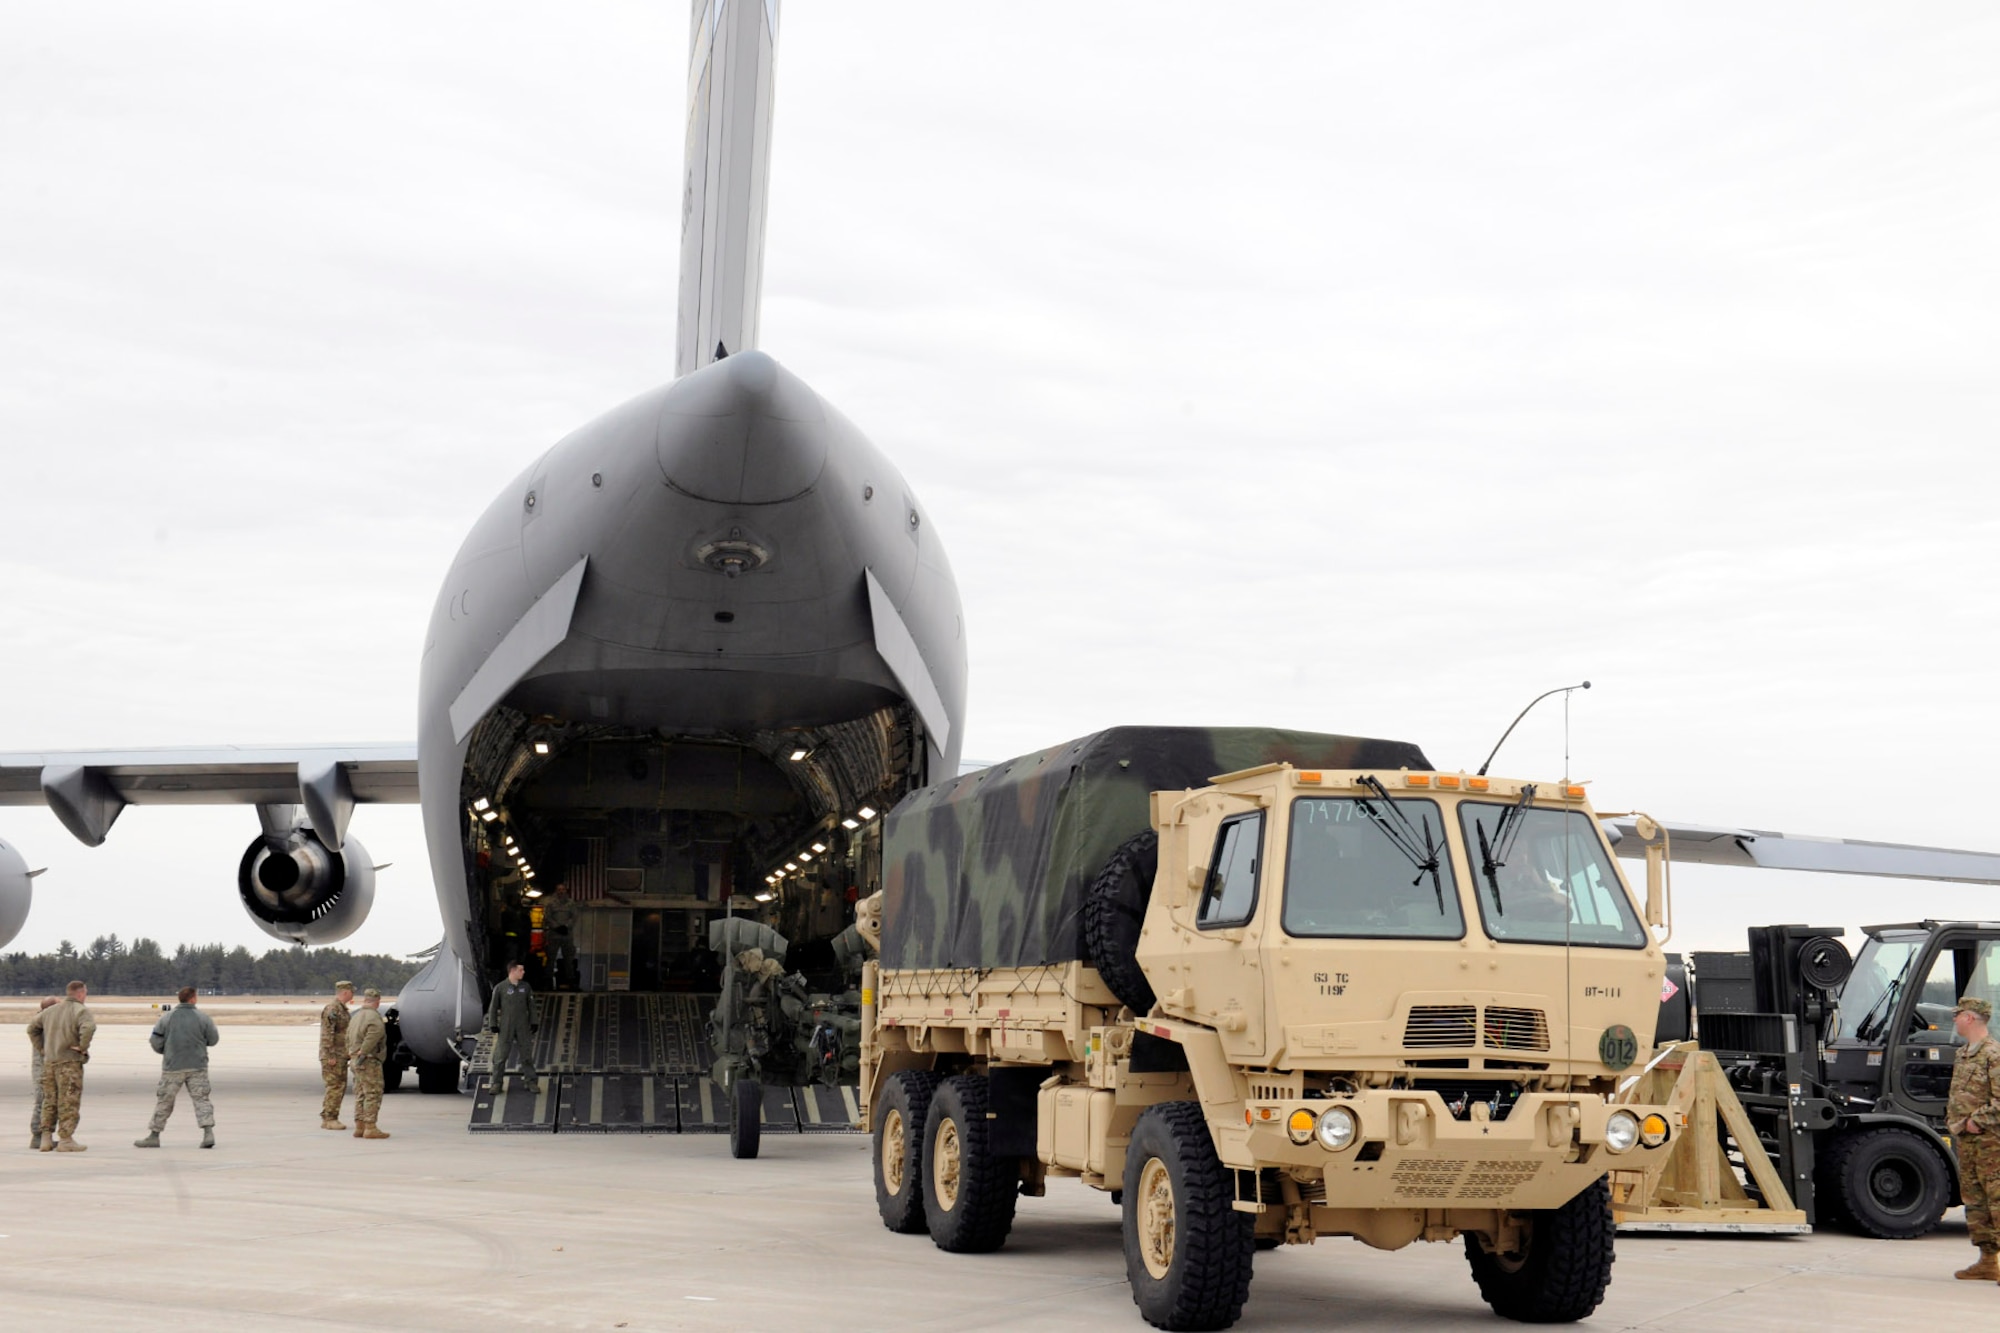 150319-Z-EZ686-314 – Soldiers, trucks, artillery pieces and other equipment from the 119th Field Artillery, Michigan Army National Guard, await loading into a C-17 Globemaster III operated by the Mississippi Air National Guard at the Alpena Combat Readiness Training Center, Mich., March 19, 2015. The equipment was loaded by Airmen from the 127th Logistics Readiness Squadron of the Michigan Air National Guard, which provides aerial port services to military units across the state of Michigan. (U.S. Air National Guard photo by Master Sgt. David Kujawa) 